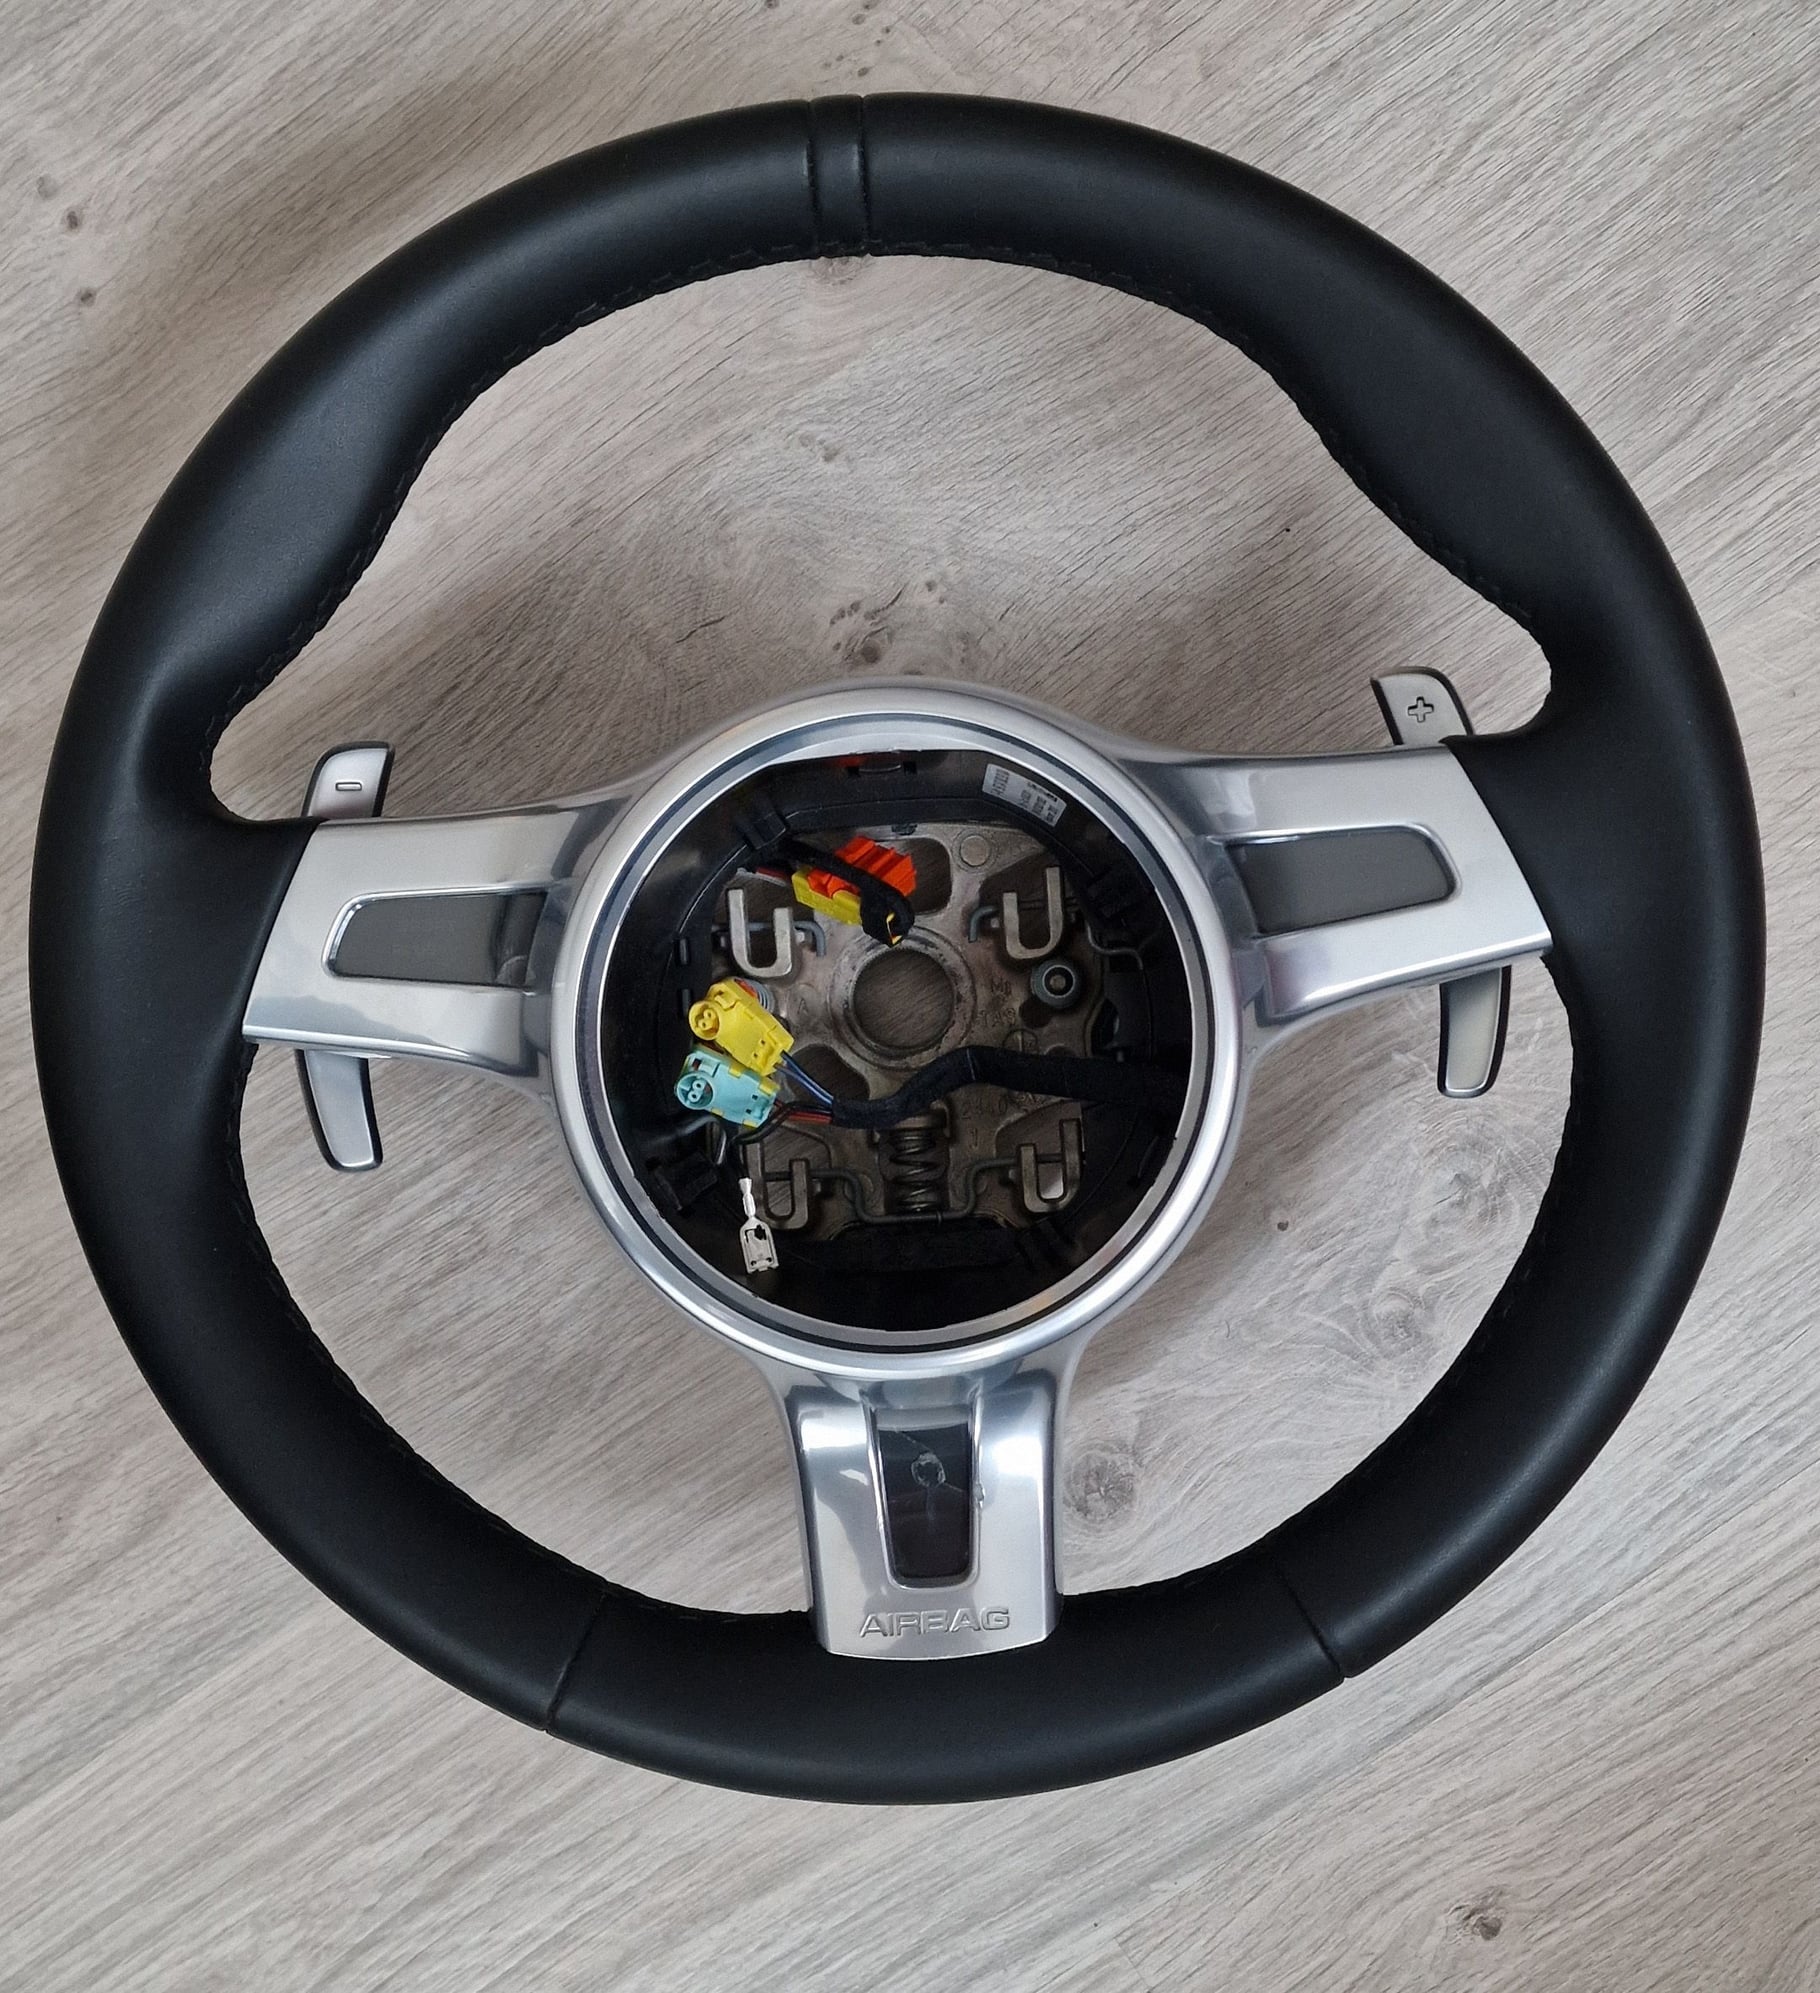 Interior/Upholstery - Leather sport steering wheel PDK SC 9x1/9x7.2 "new" with small shipping damage - Used - 0  All Models - New Castle, DE 00000, United States